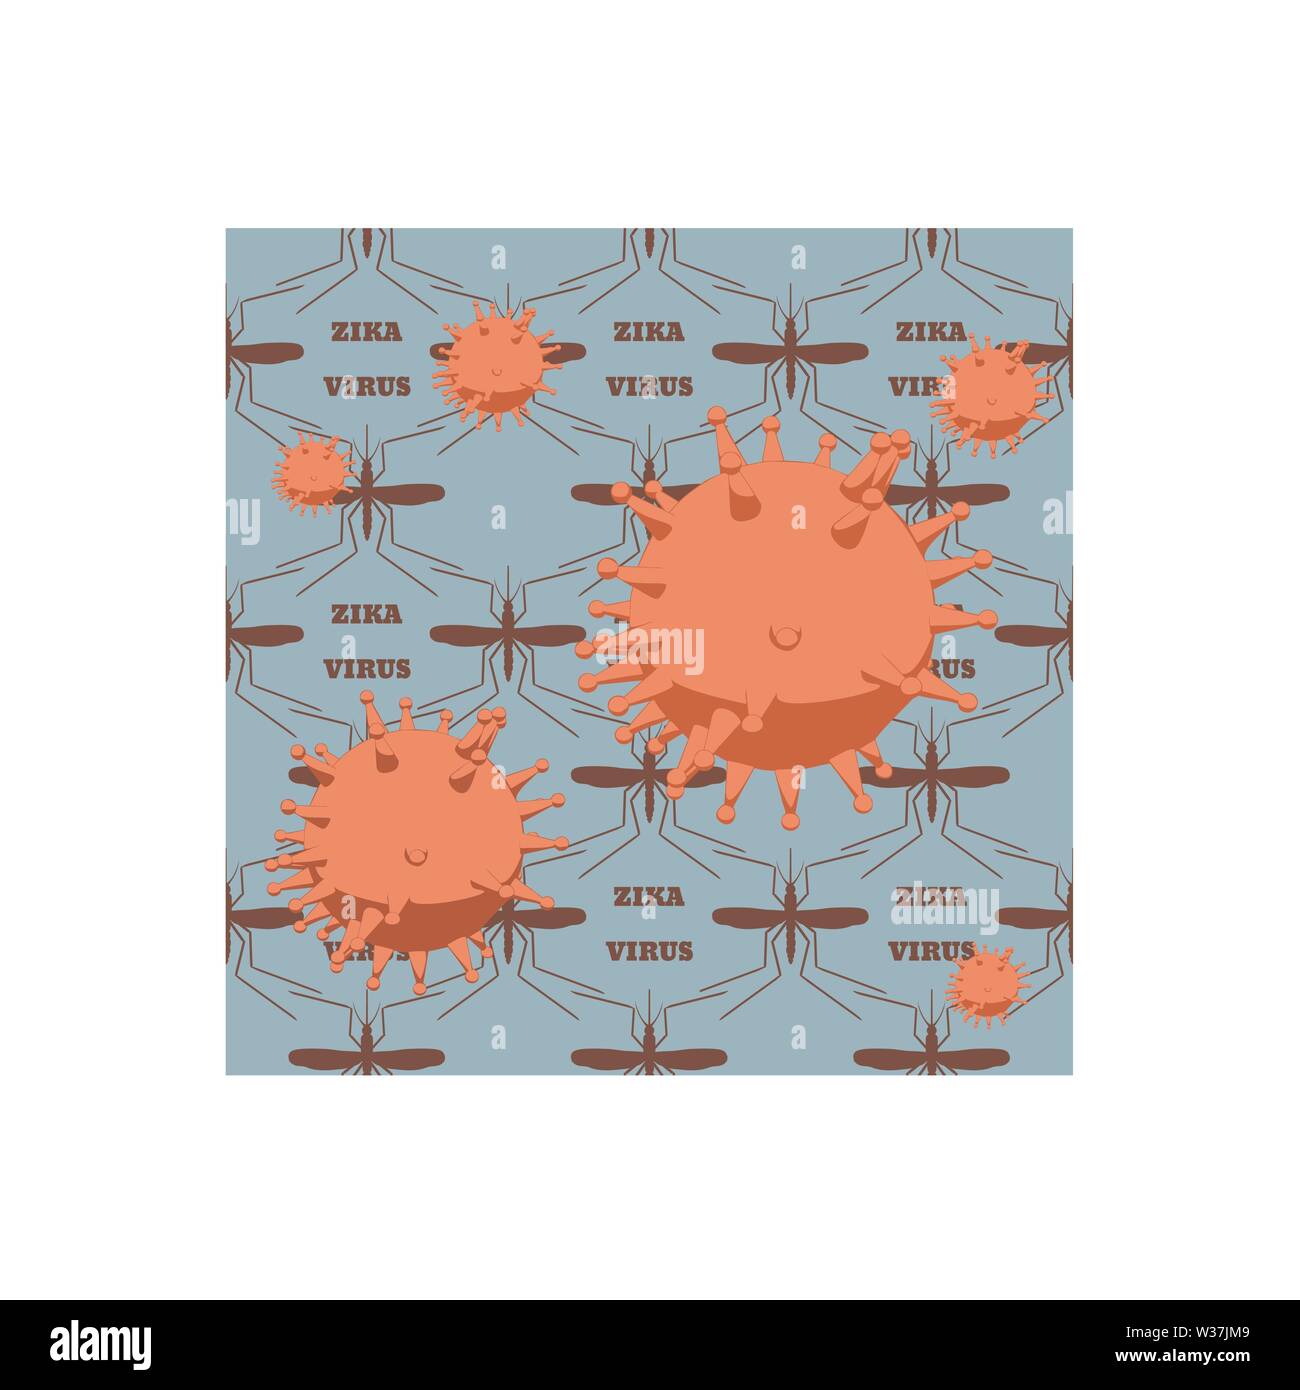 Medical industry, biotechnology and biochemistry. Scientific medical designs. Mosquito silhouette icons. Insect transmitted diseases relative backdrop Stock Vector